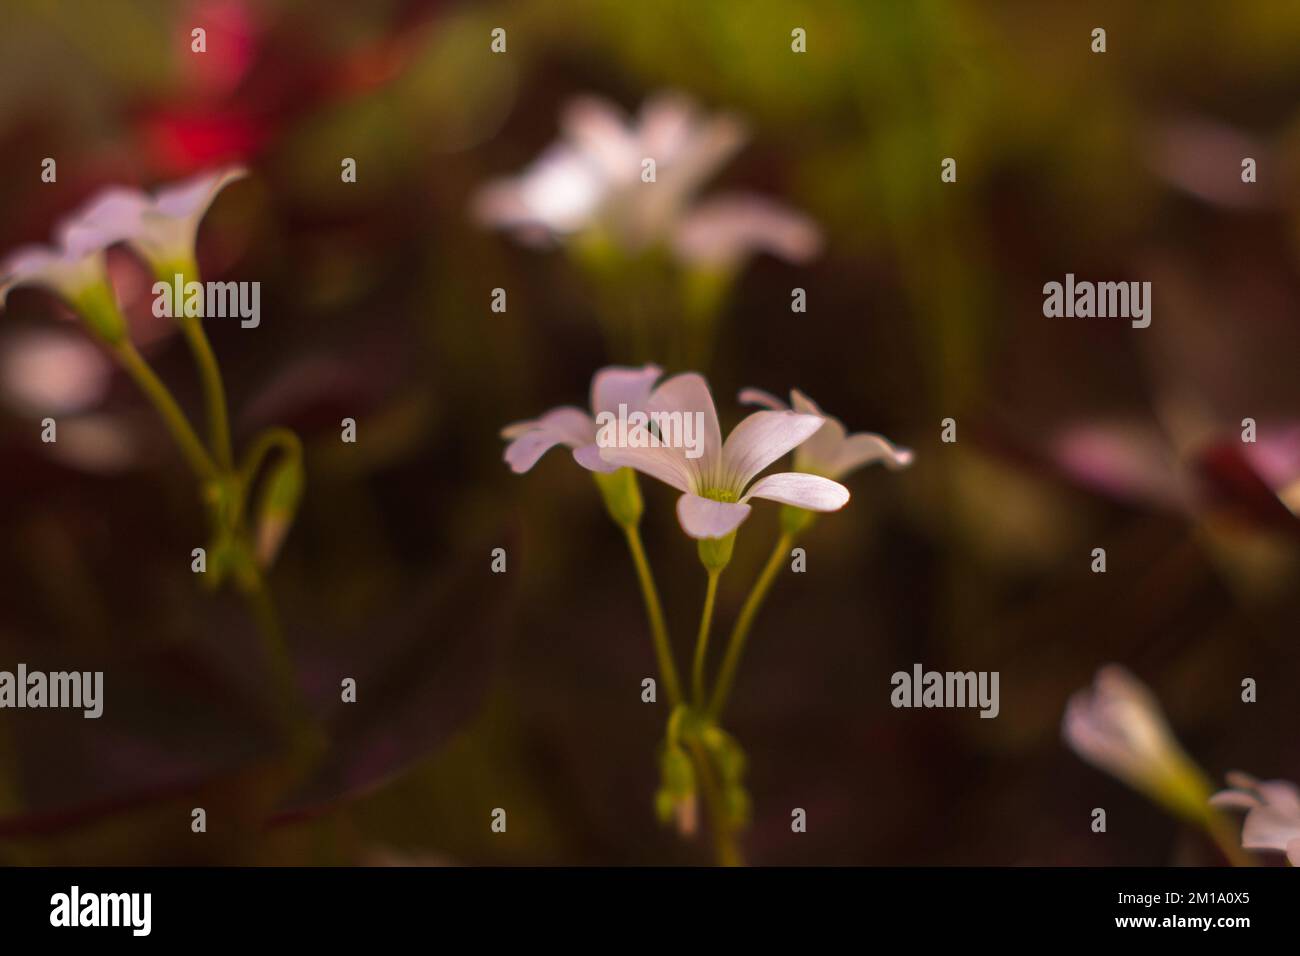 The close-up view of Oxalis barrelieri plant bulbs Stock Photo